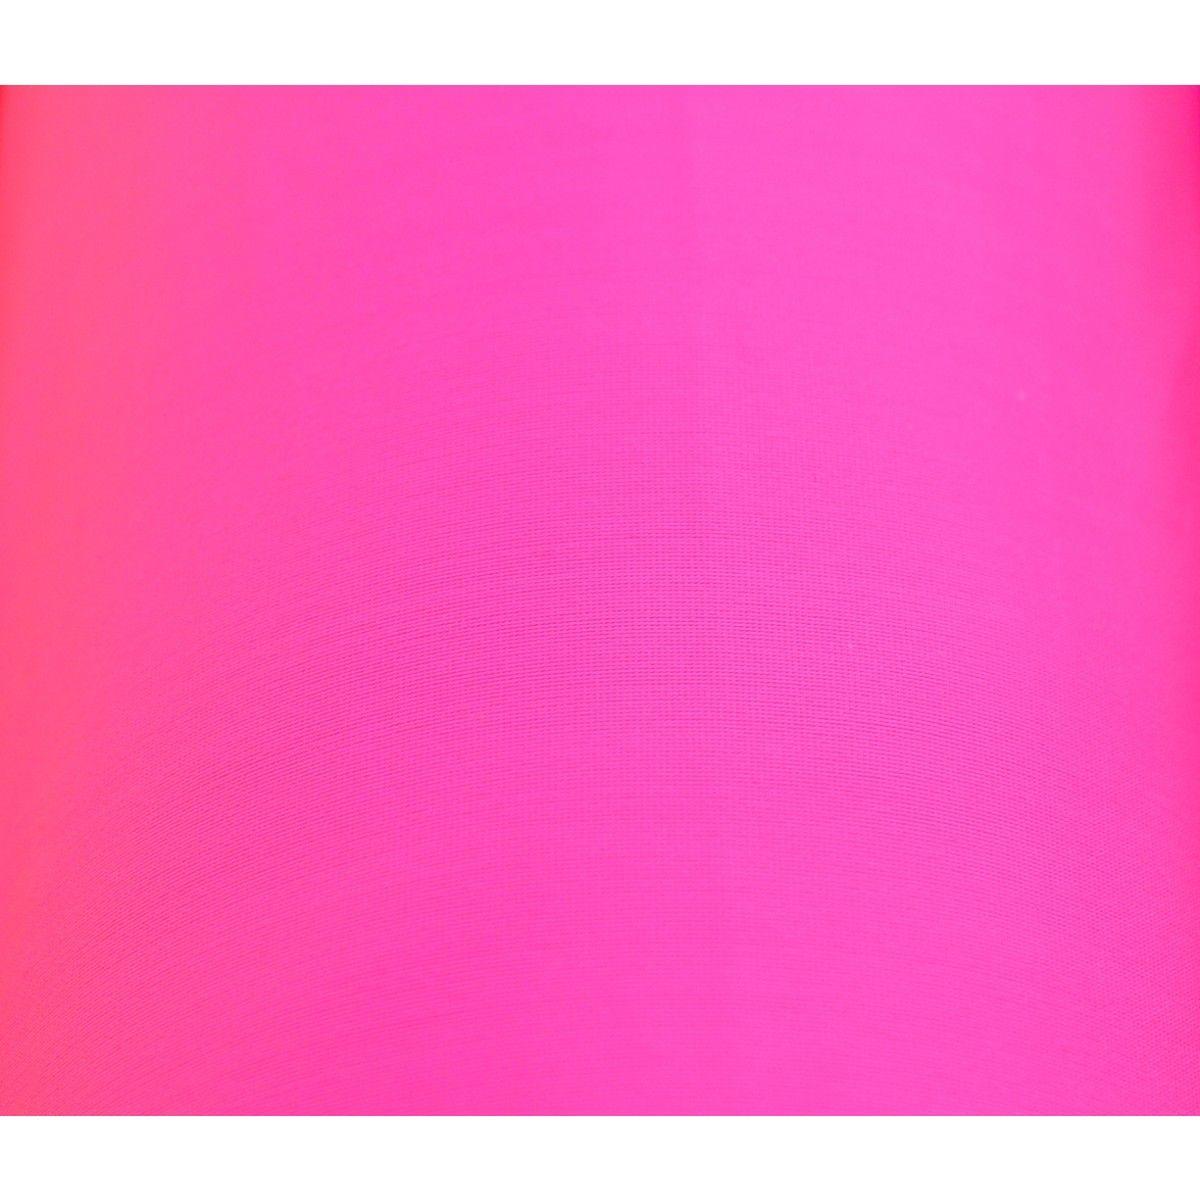 Aggregate 82+ solid hot pink wallpaper best - in.cdgdbentre